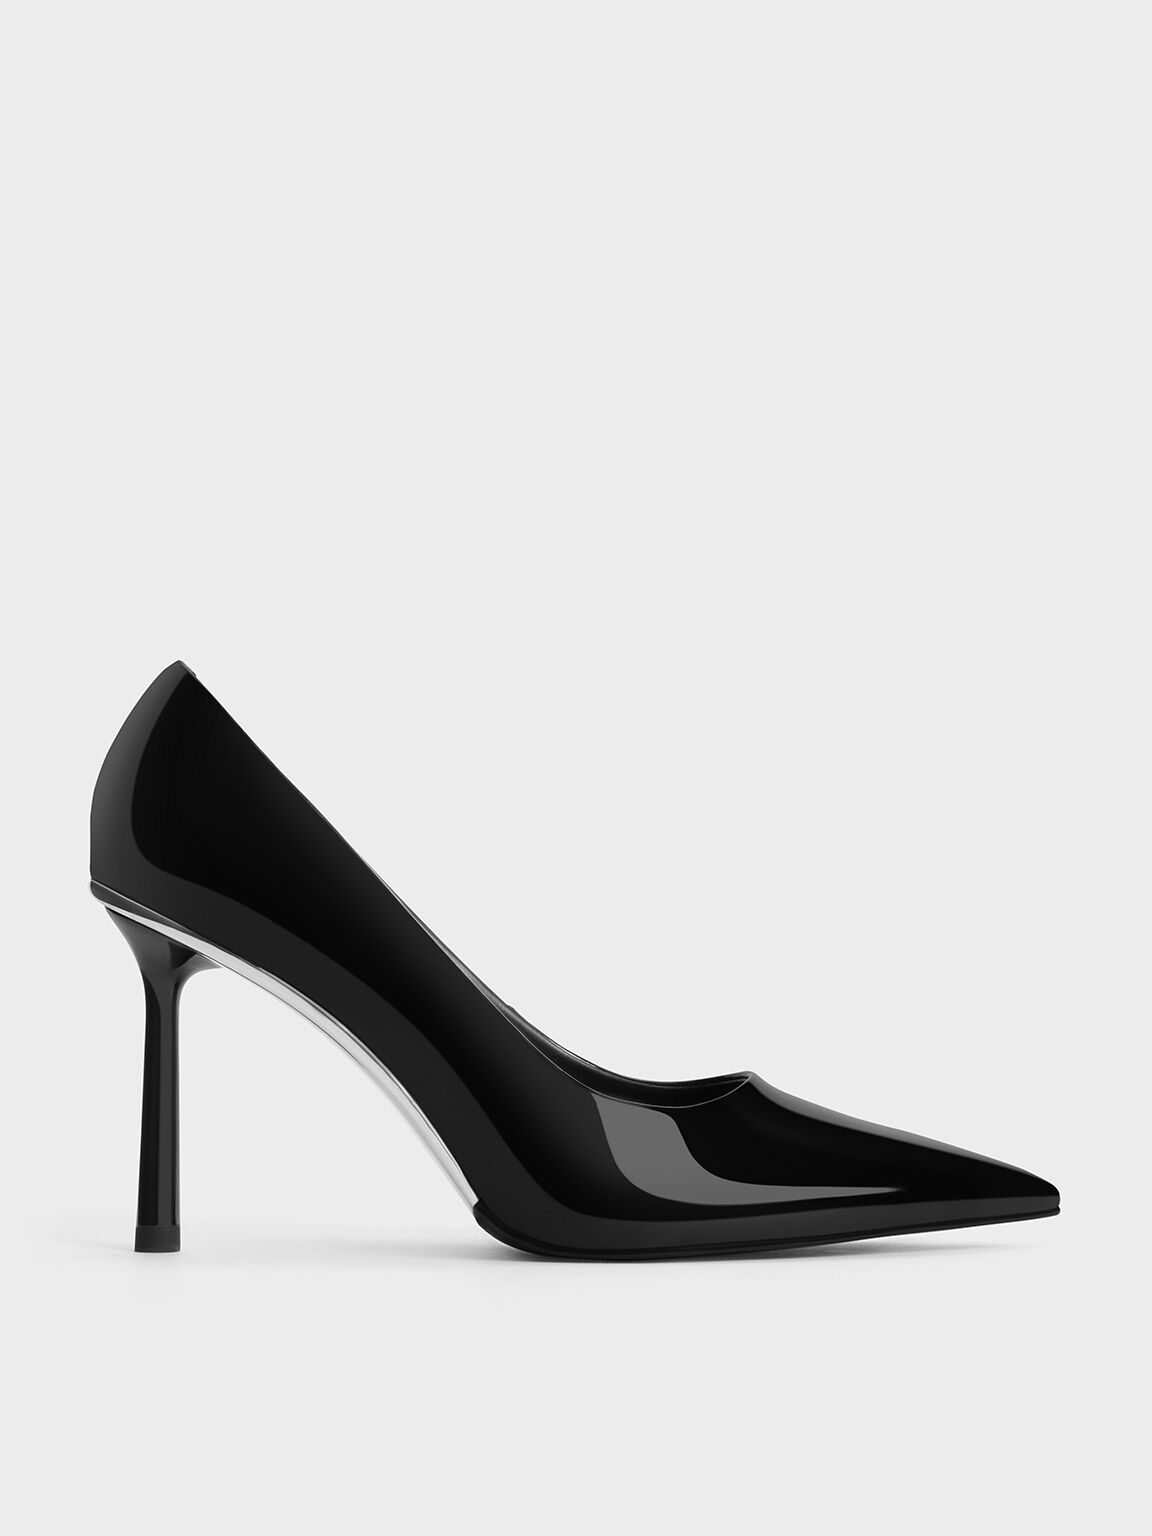 ASOS DESIGN Penza pointed high heeled court shoes in black patent | ASOS